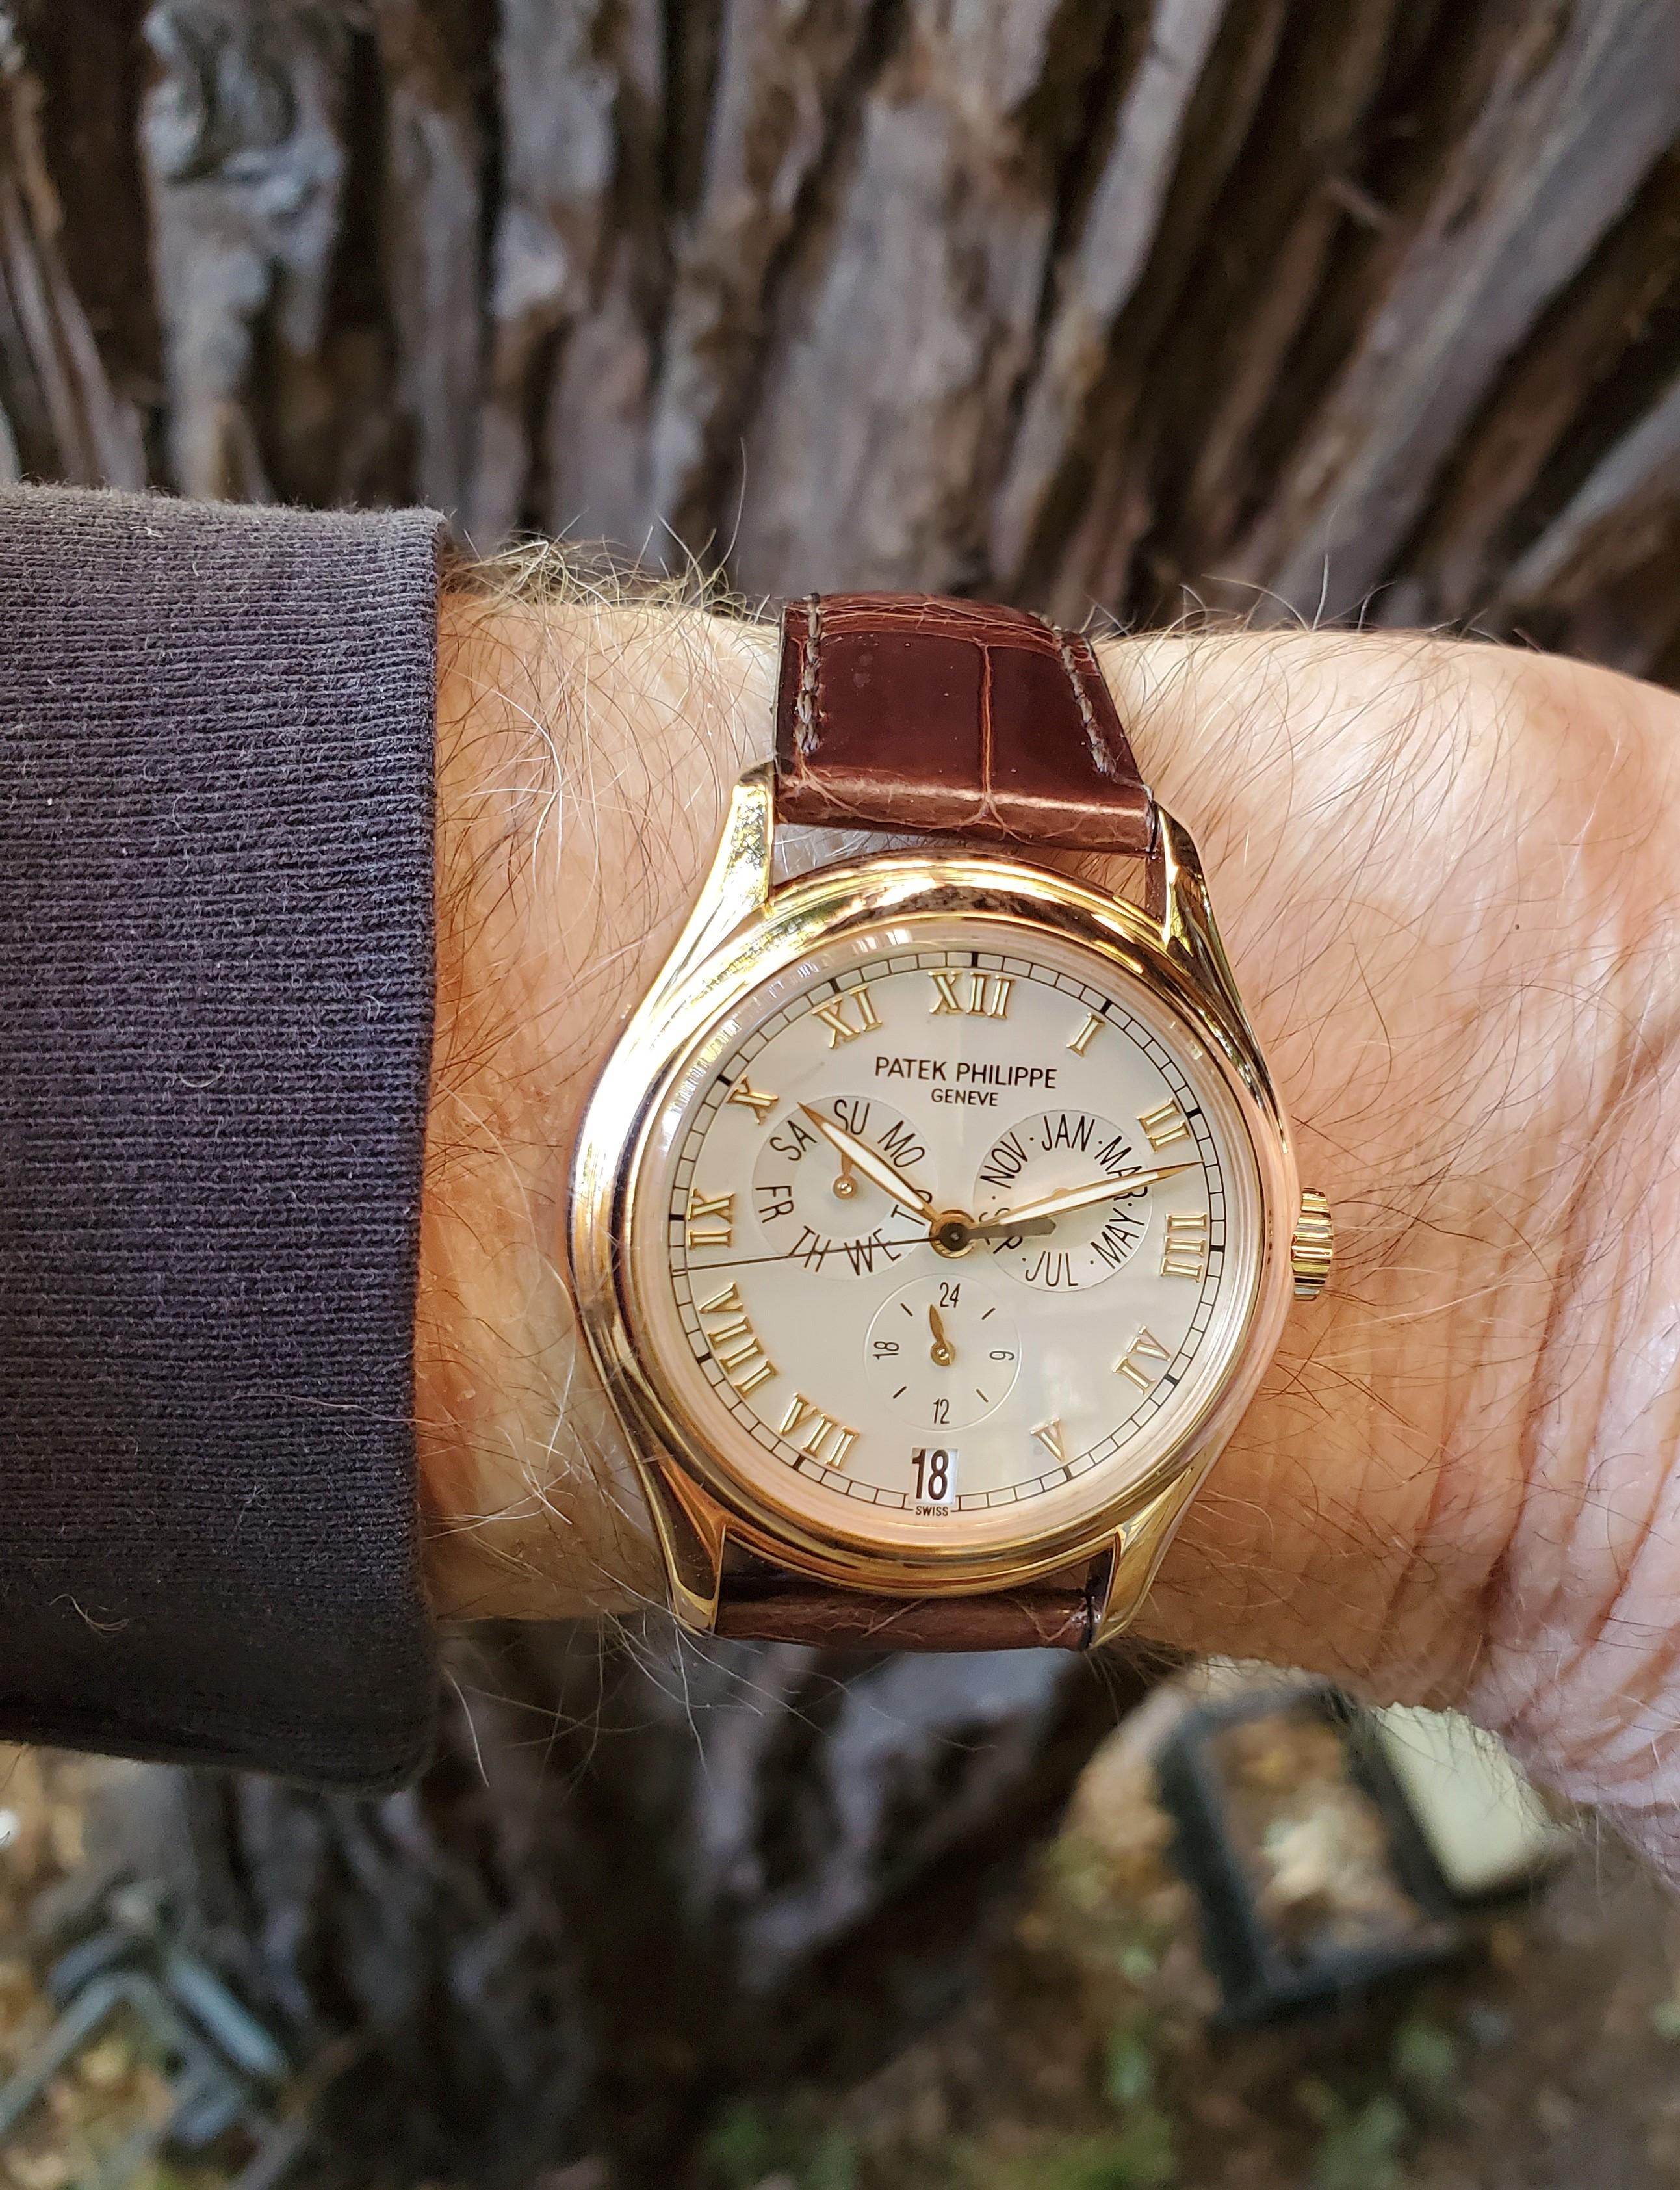 Patek Philippe 5035R Complicated Annual Calendar.  The watch is made in 18K rose gold with a 24 hour indication, Day, Date, Month, Circa 2000.  The Dial is silvered white, with raised rose gold Roman numerals, radium hand, The watch is fitted with 